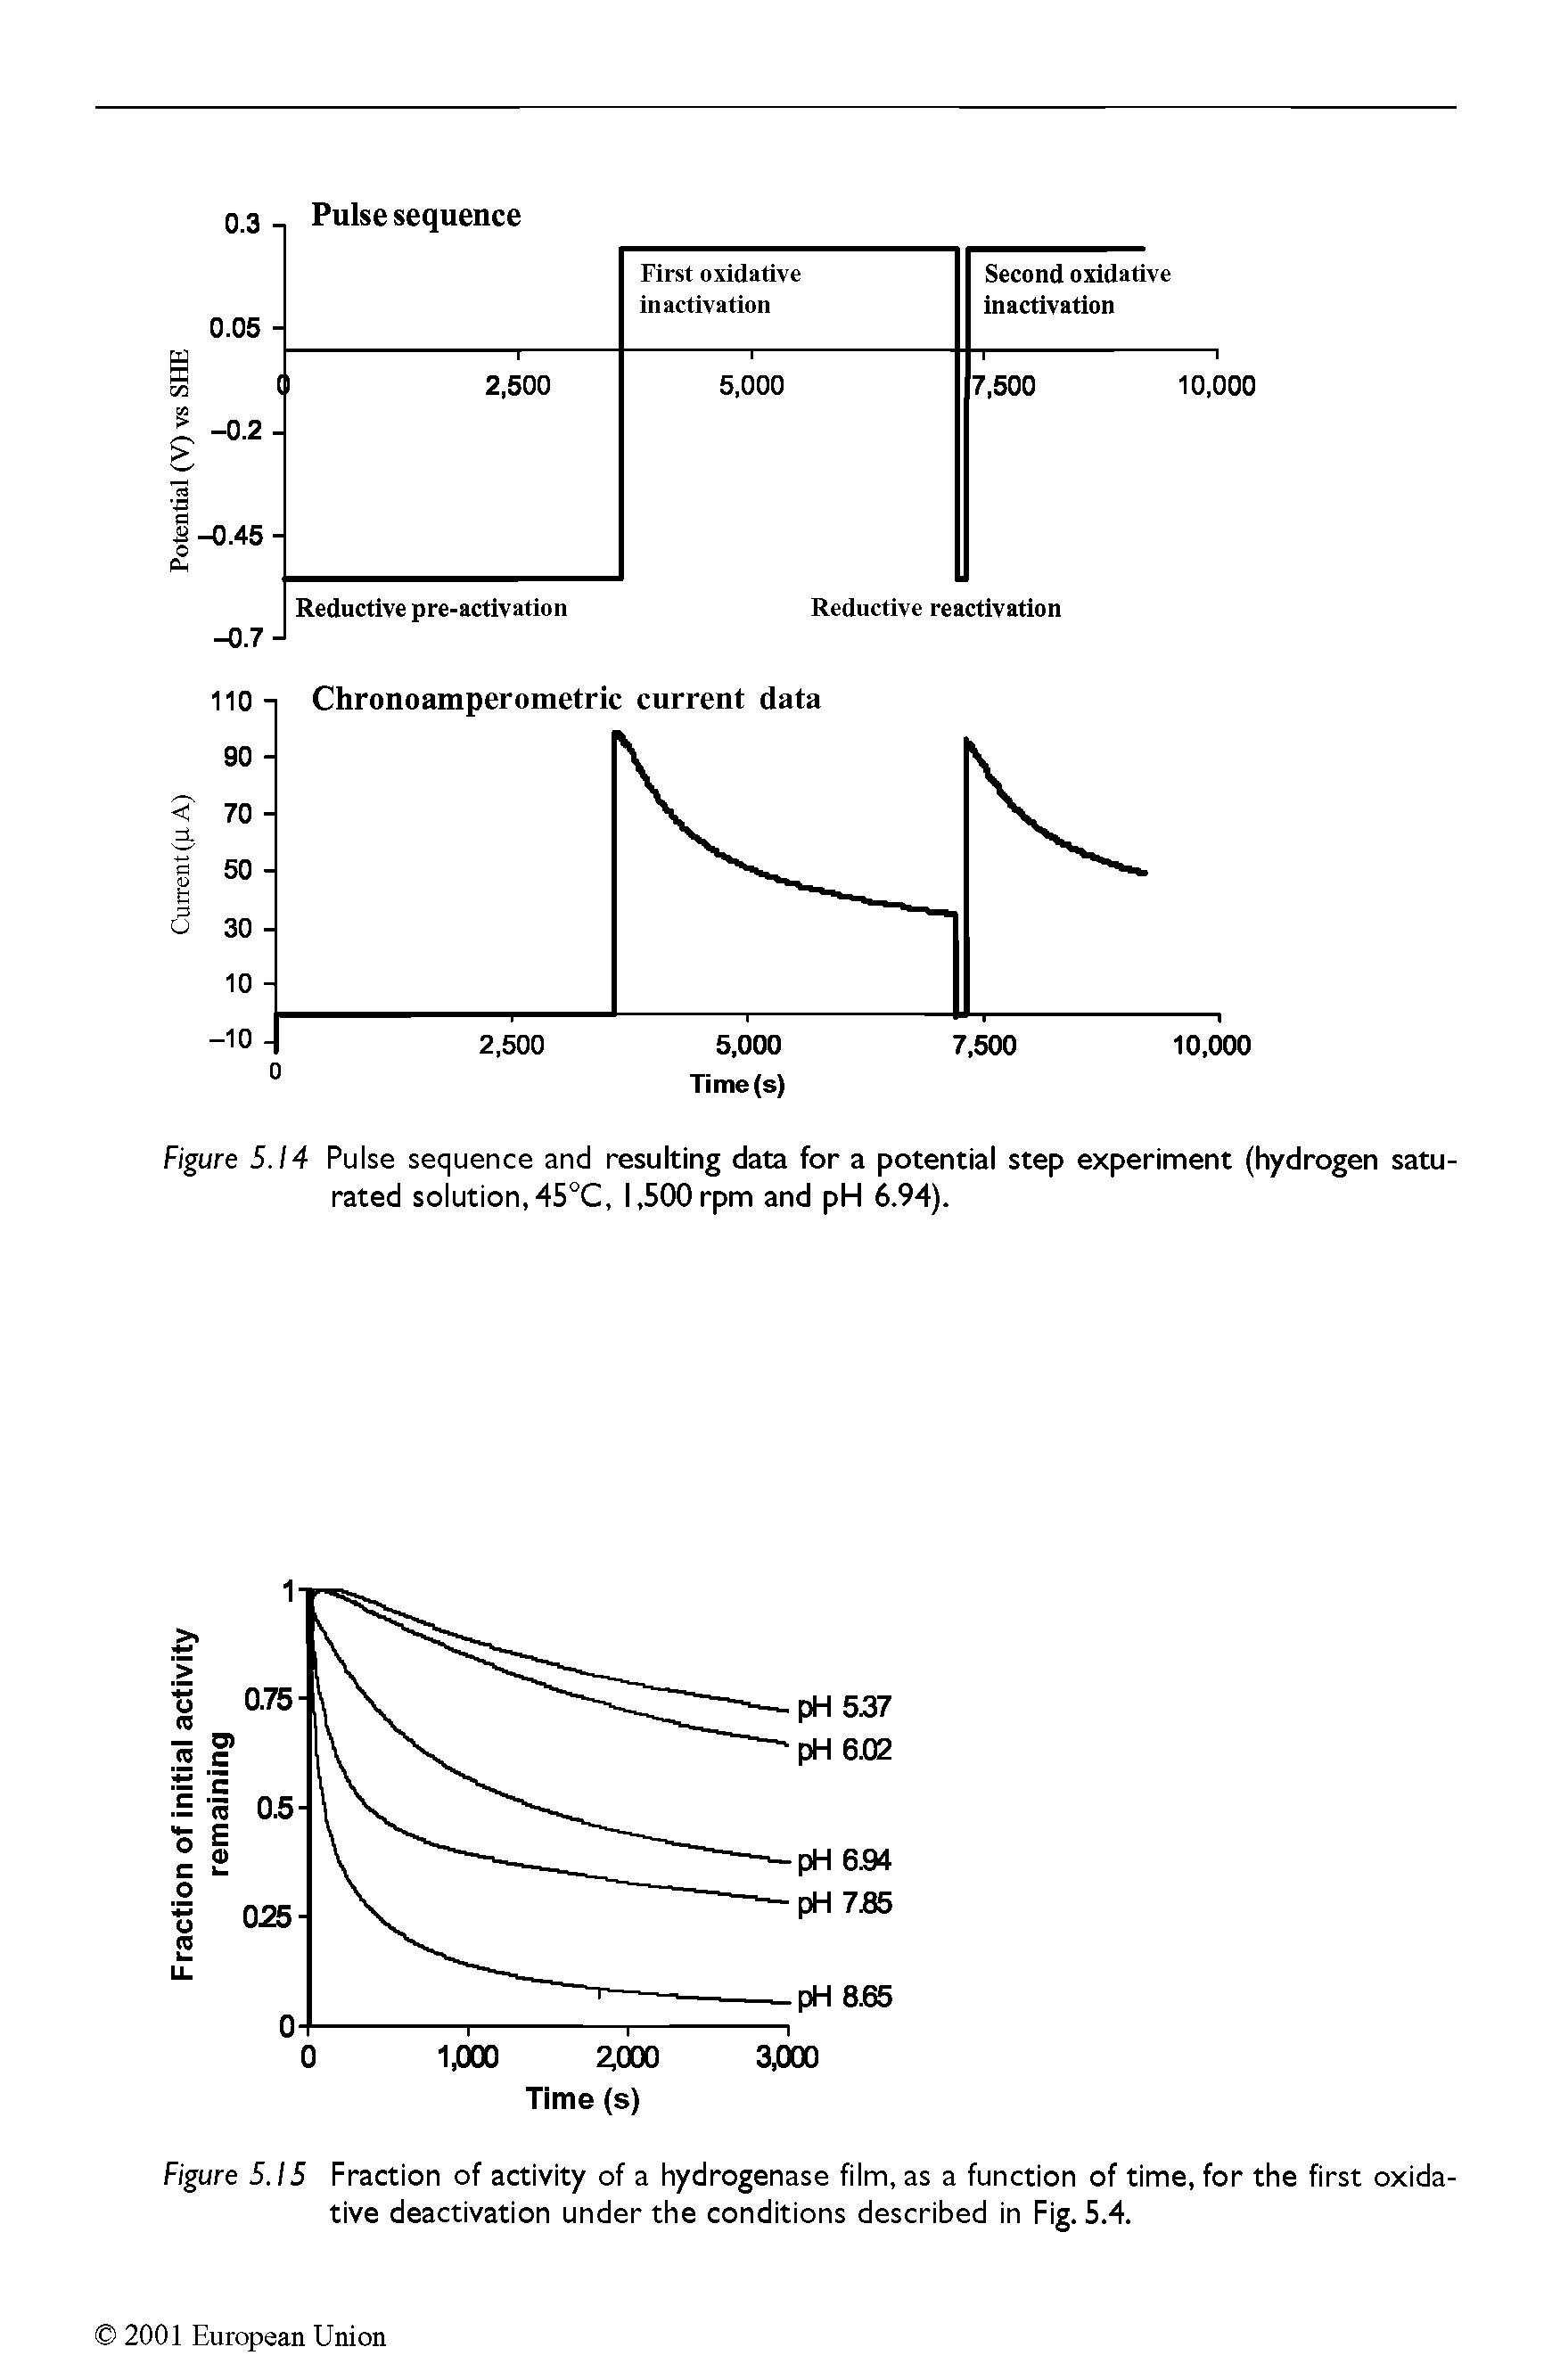 Figure 5.14 Pulse sequence and resulting data for a potential step experiment (hydrogen saturated solution, 4S°C, 1,500 rpm and pH 6.94).